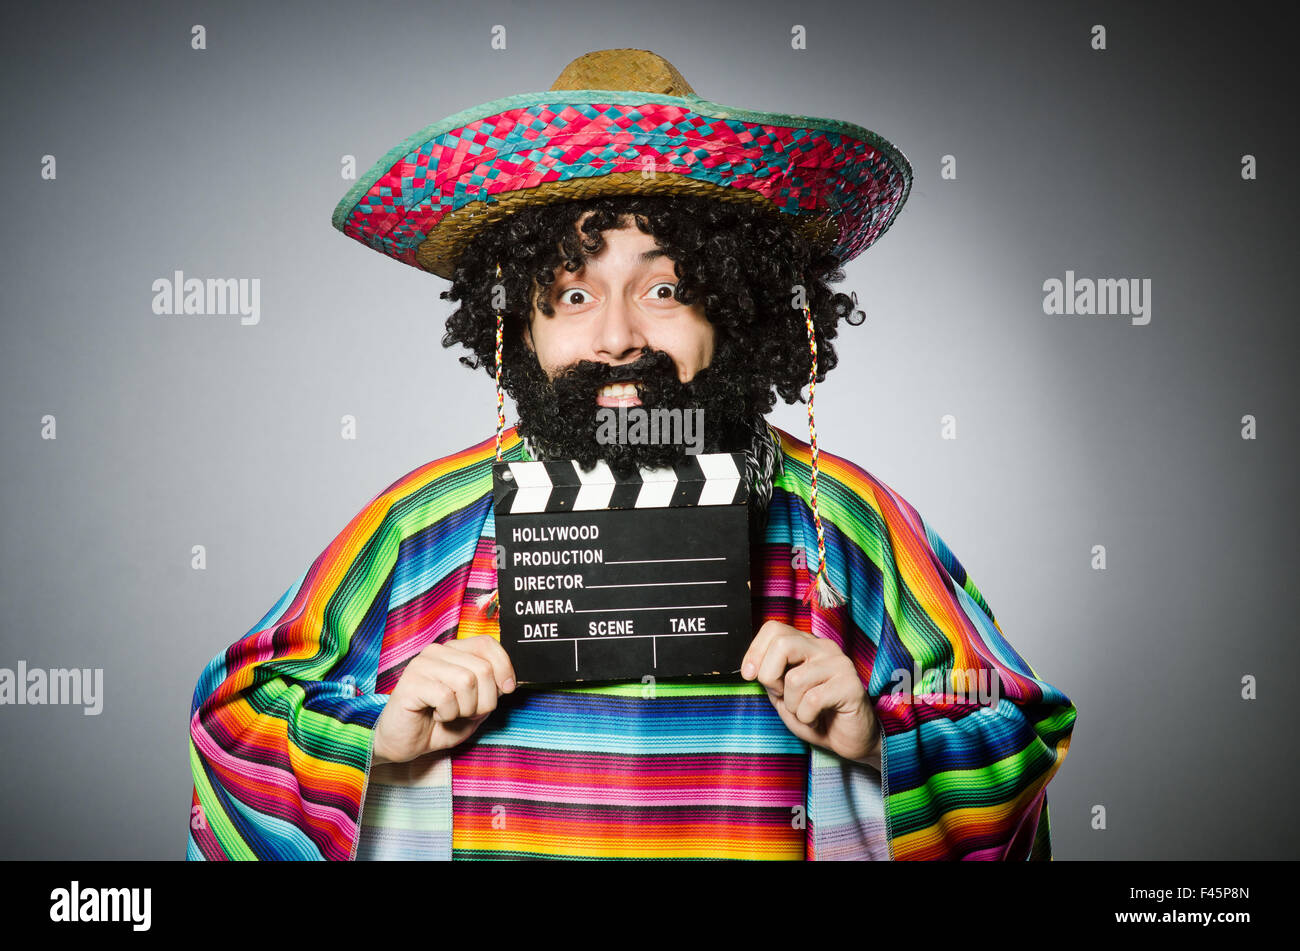 1018 Hairy Mexican Stock Photos, Images & Pictures